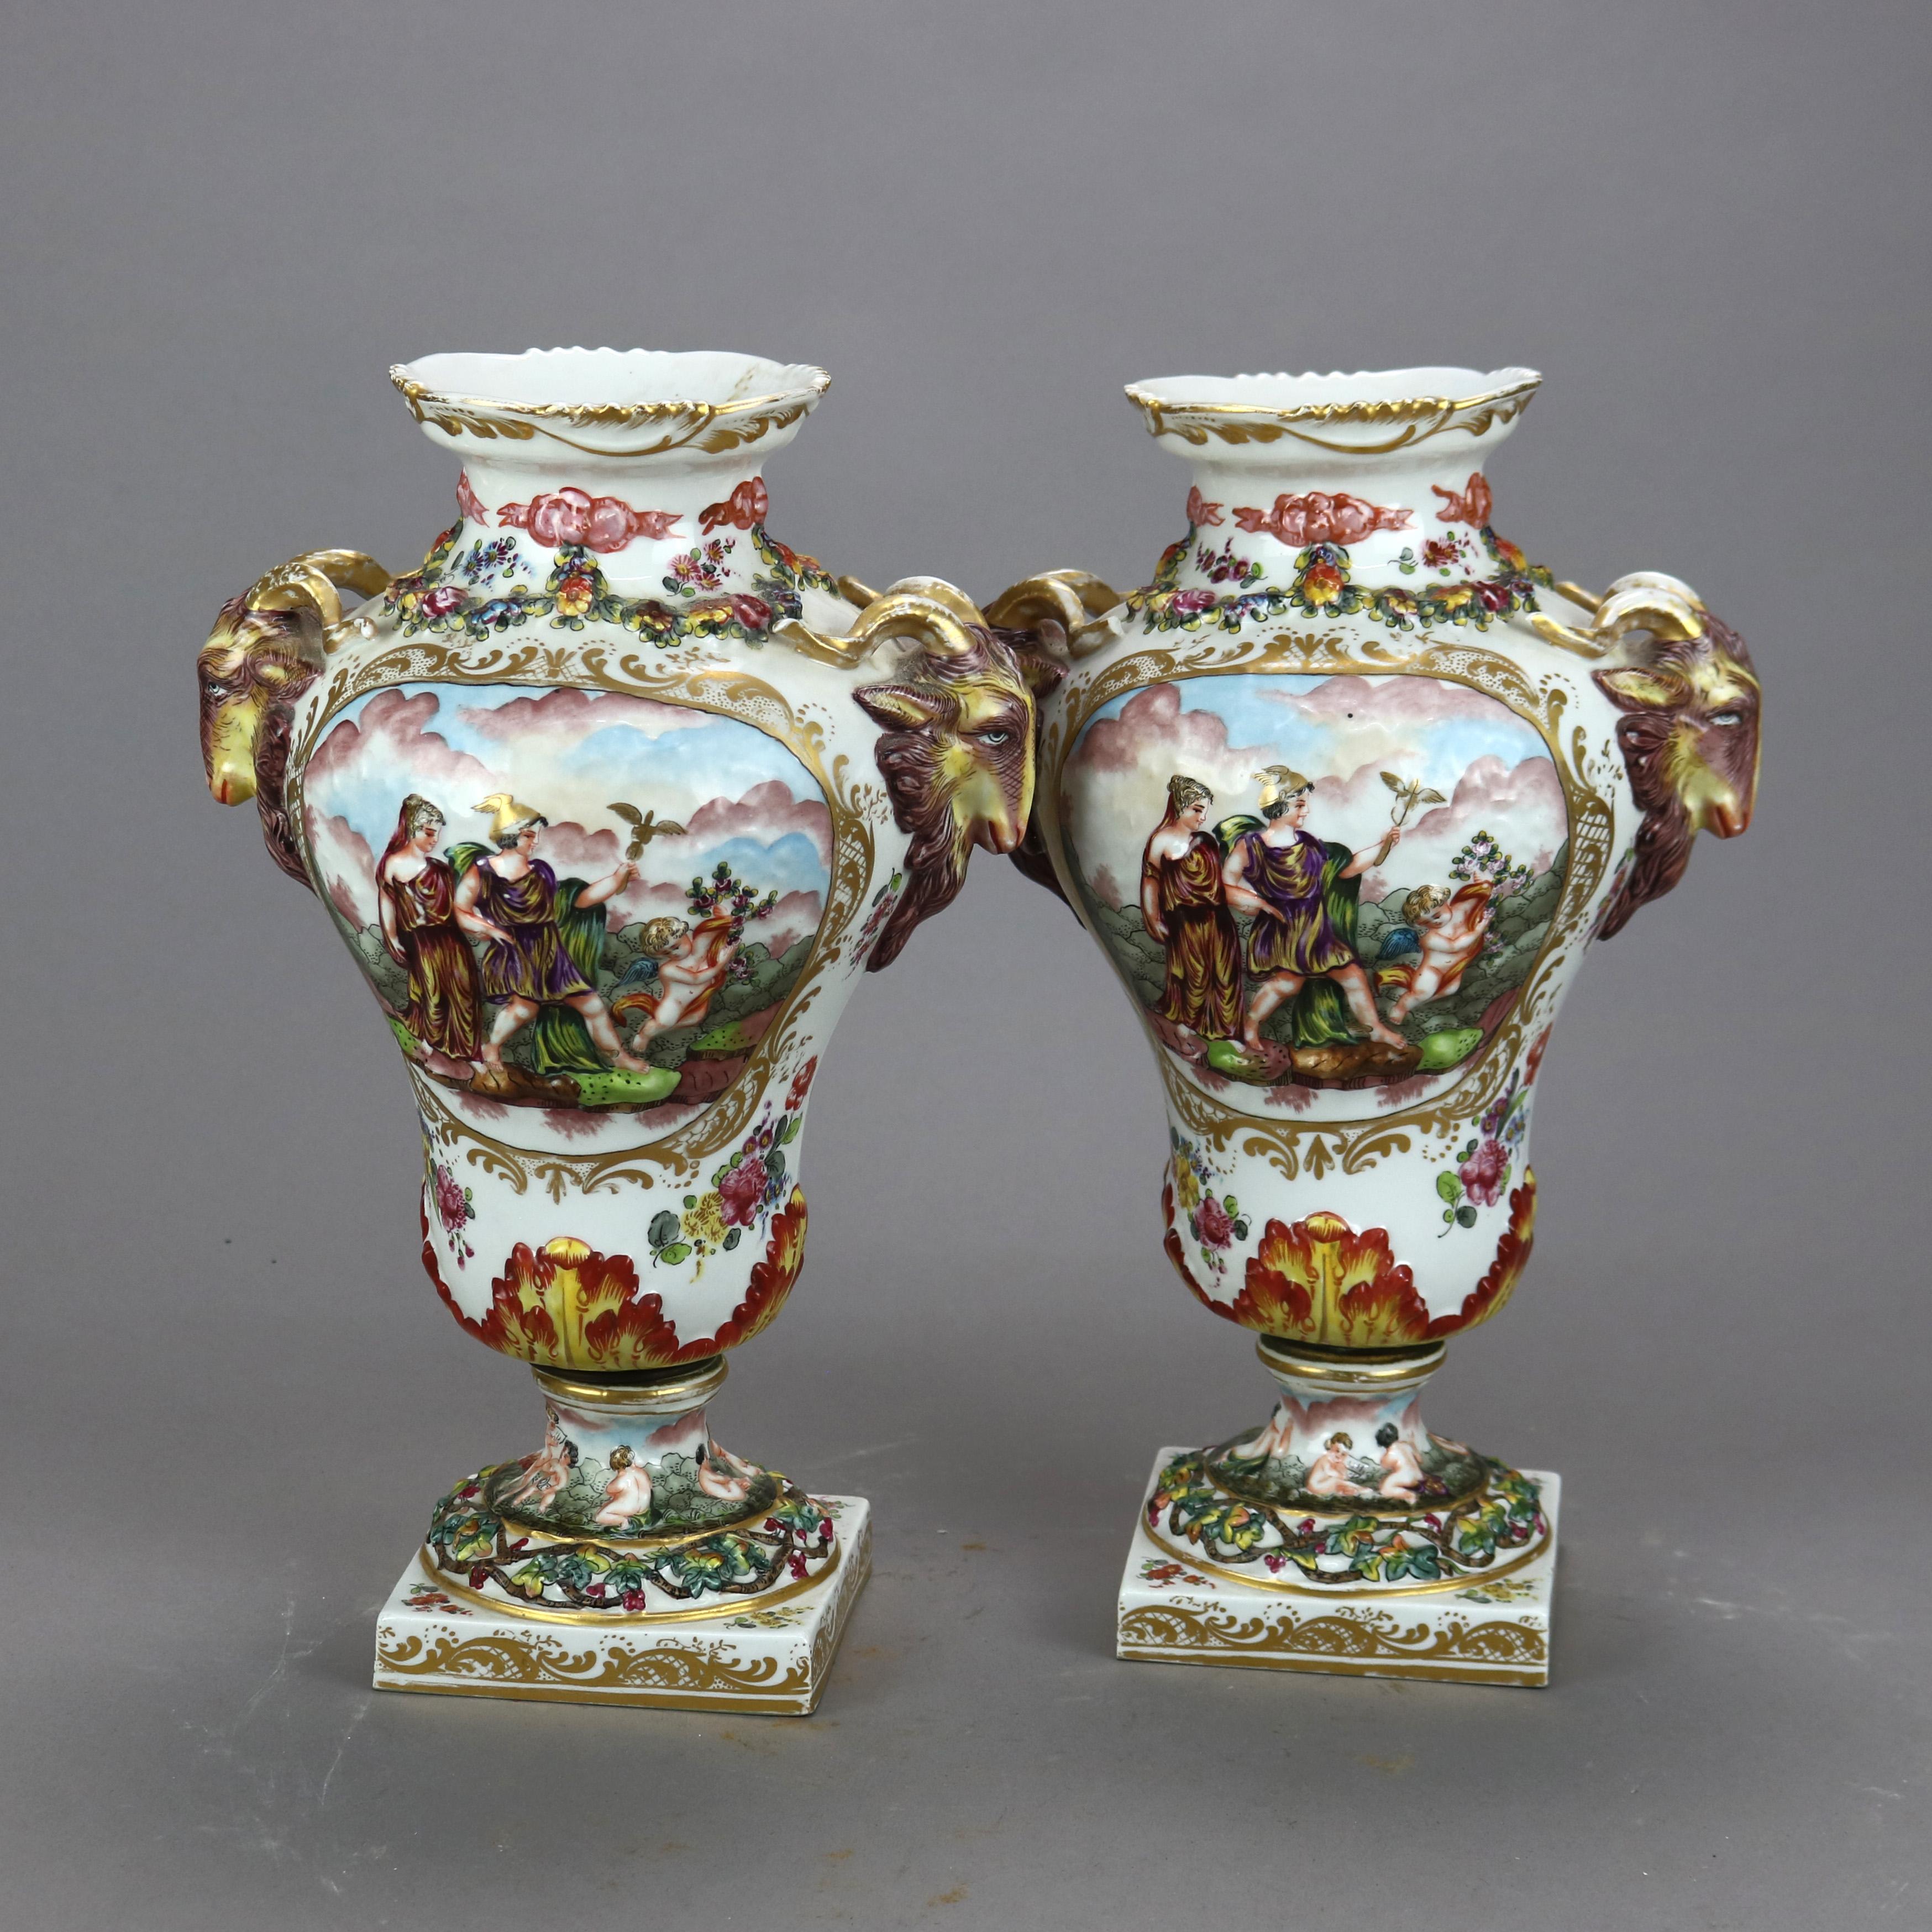 An antique pair of German urns by Potschappel of Saxony offer porcelain construction with central hand painted Classical genre scenes in relief and double figural goat handles, gilt highlights throughout, five prong crown N mark as photographed,